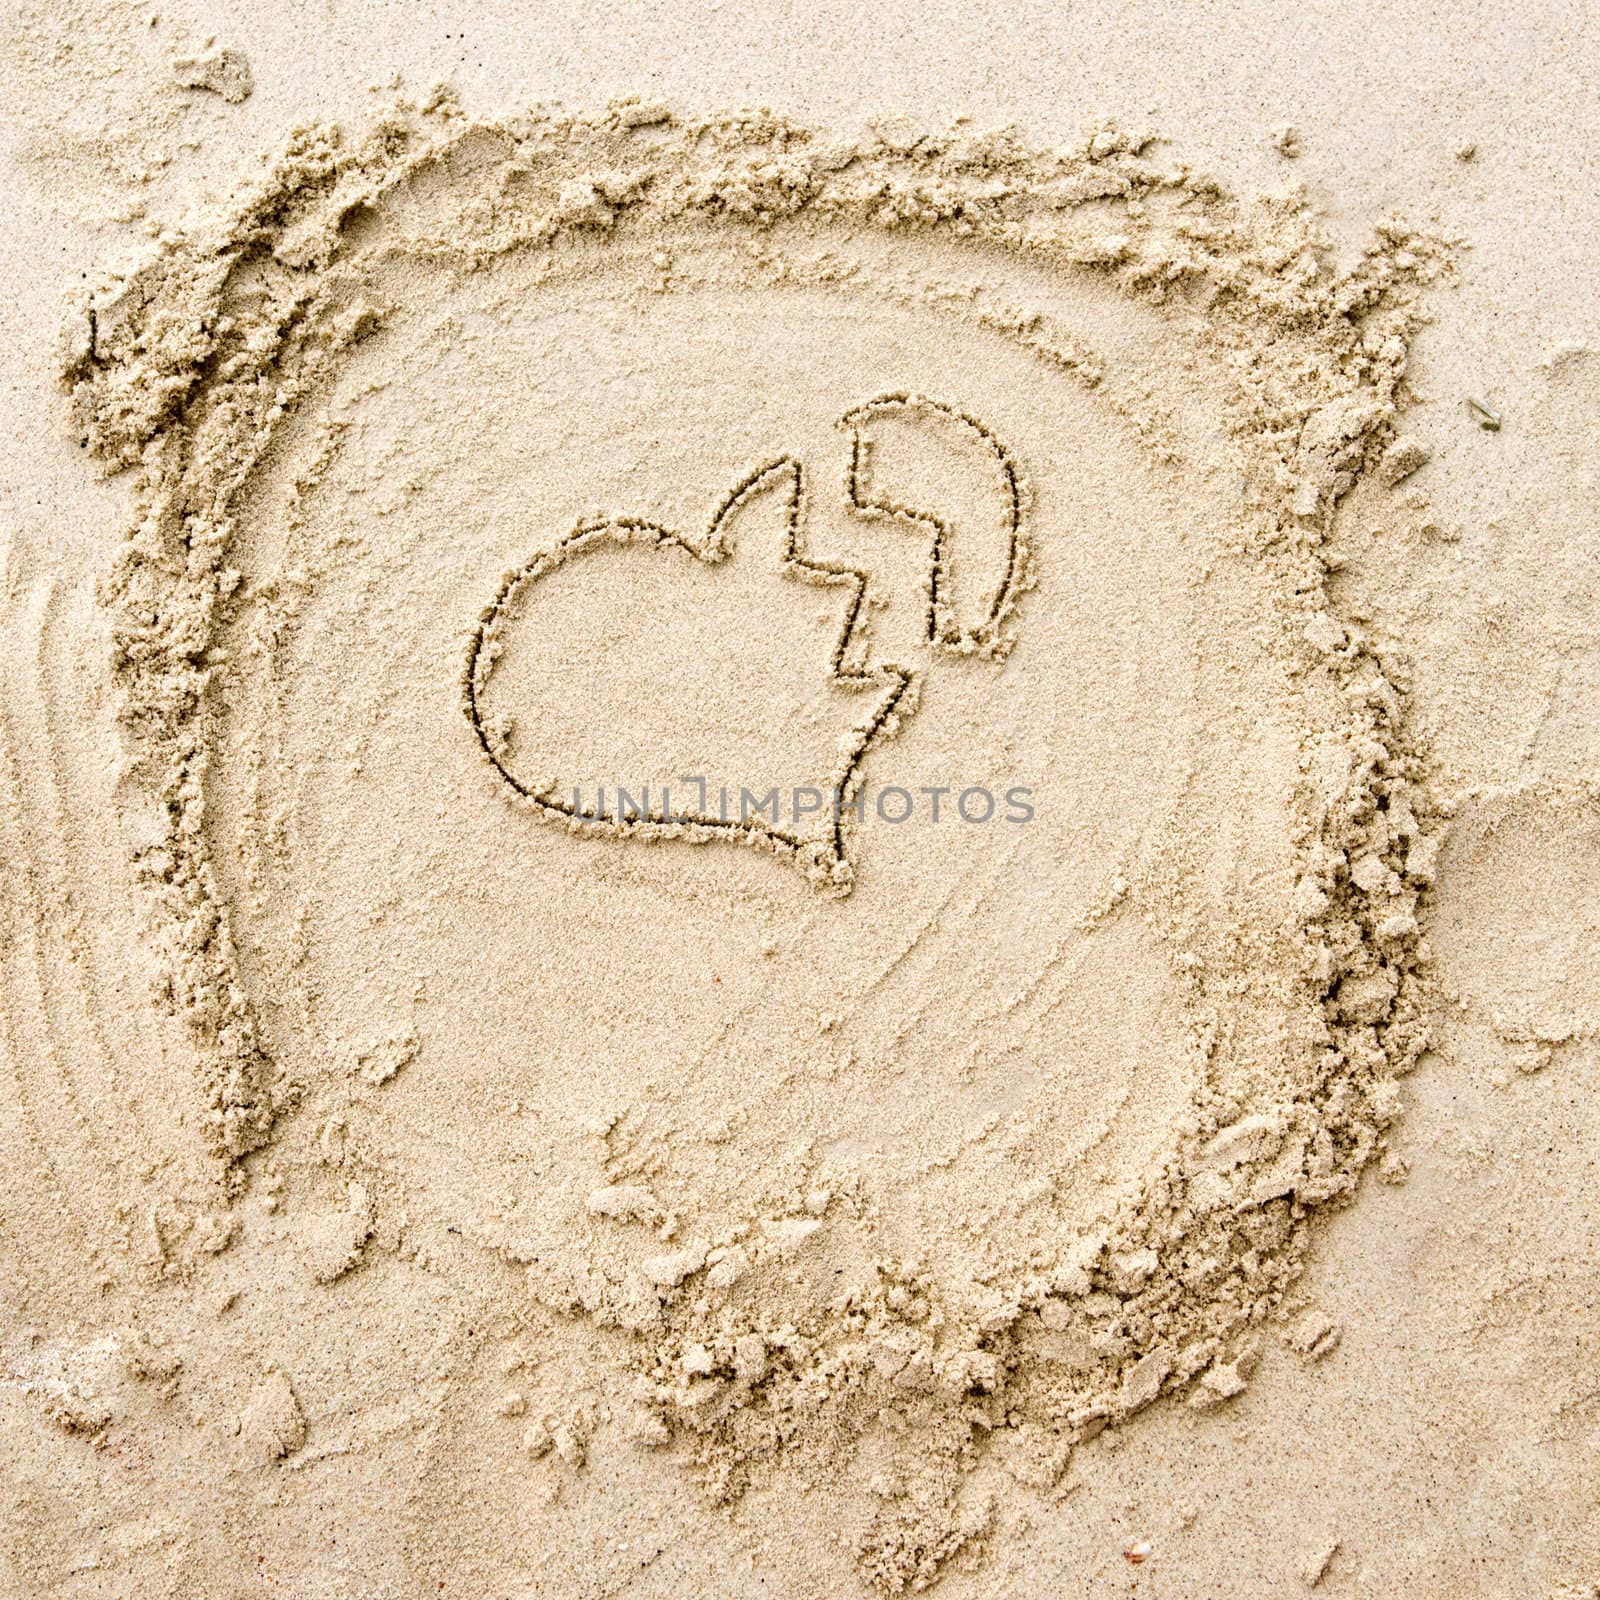 The drawing of breaken heart on the sand